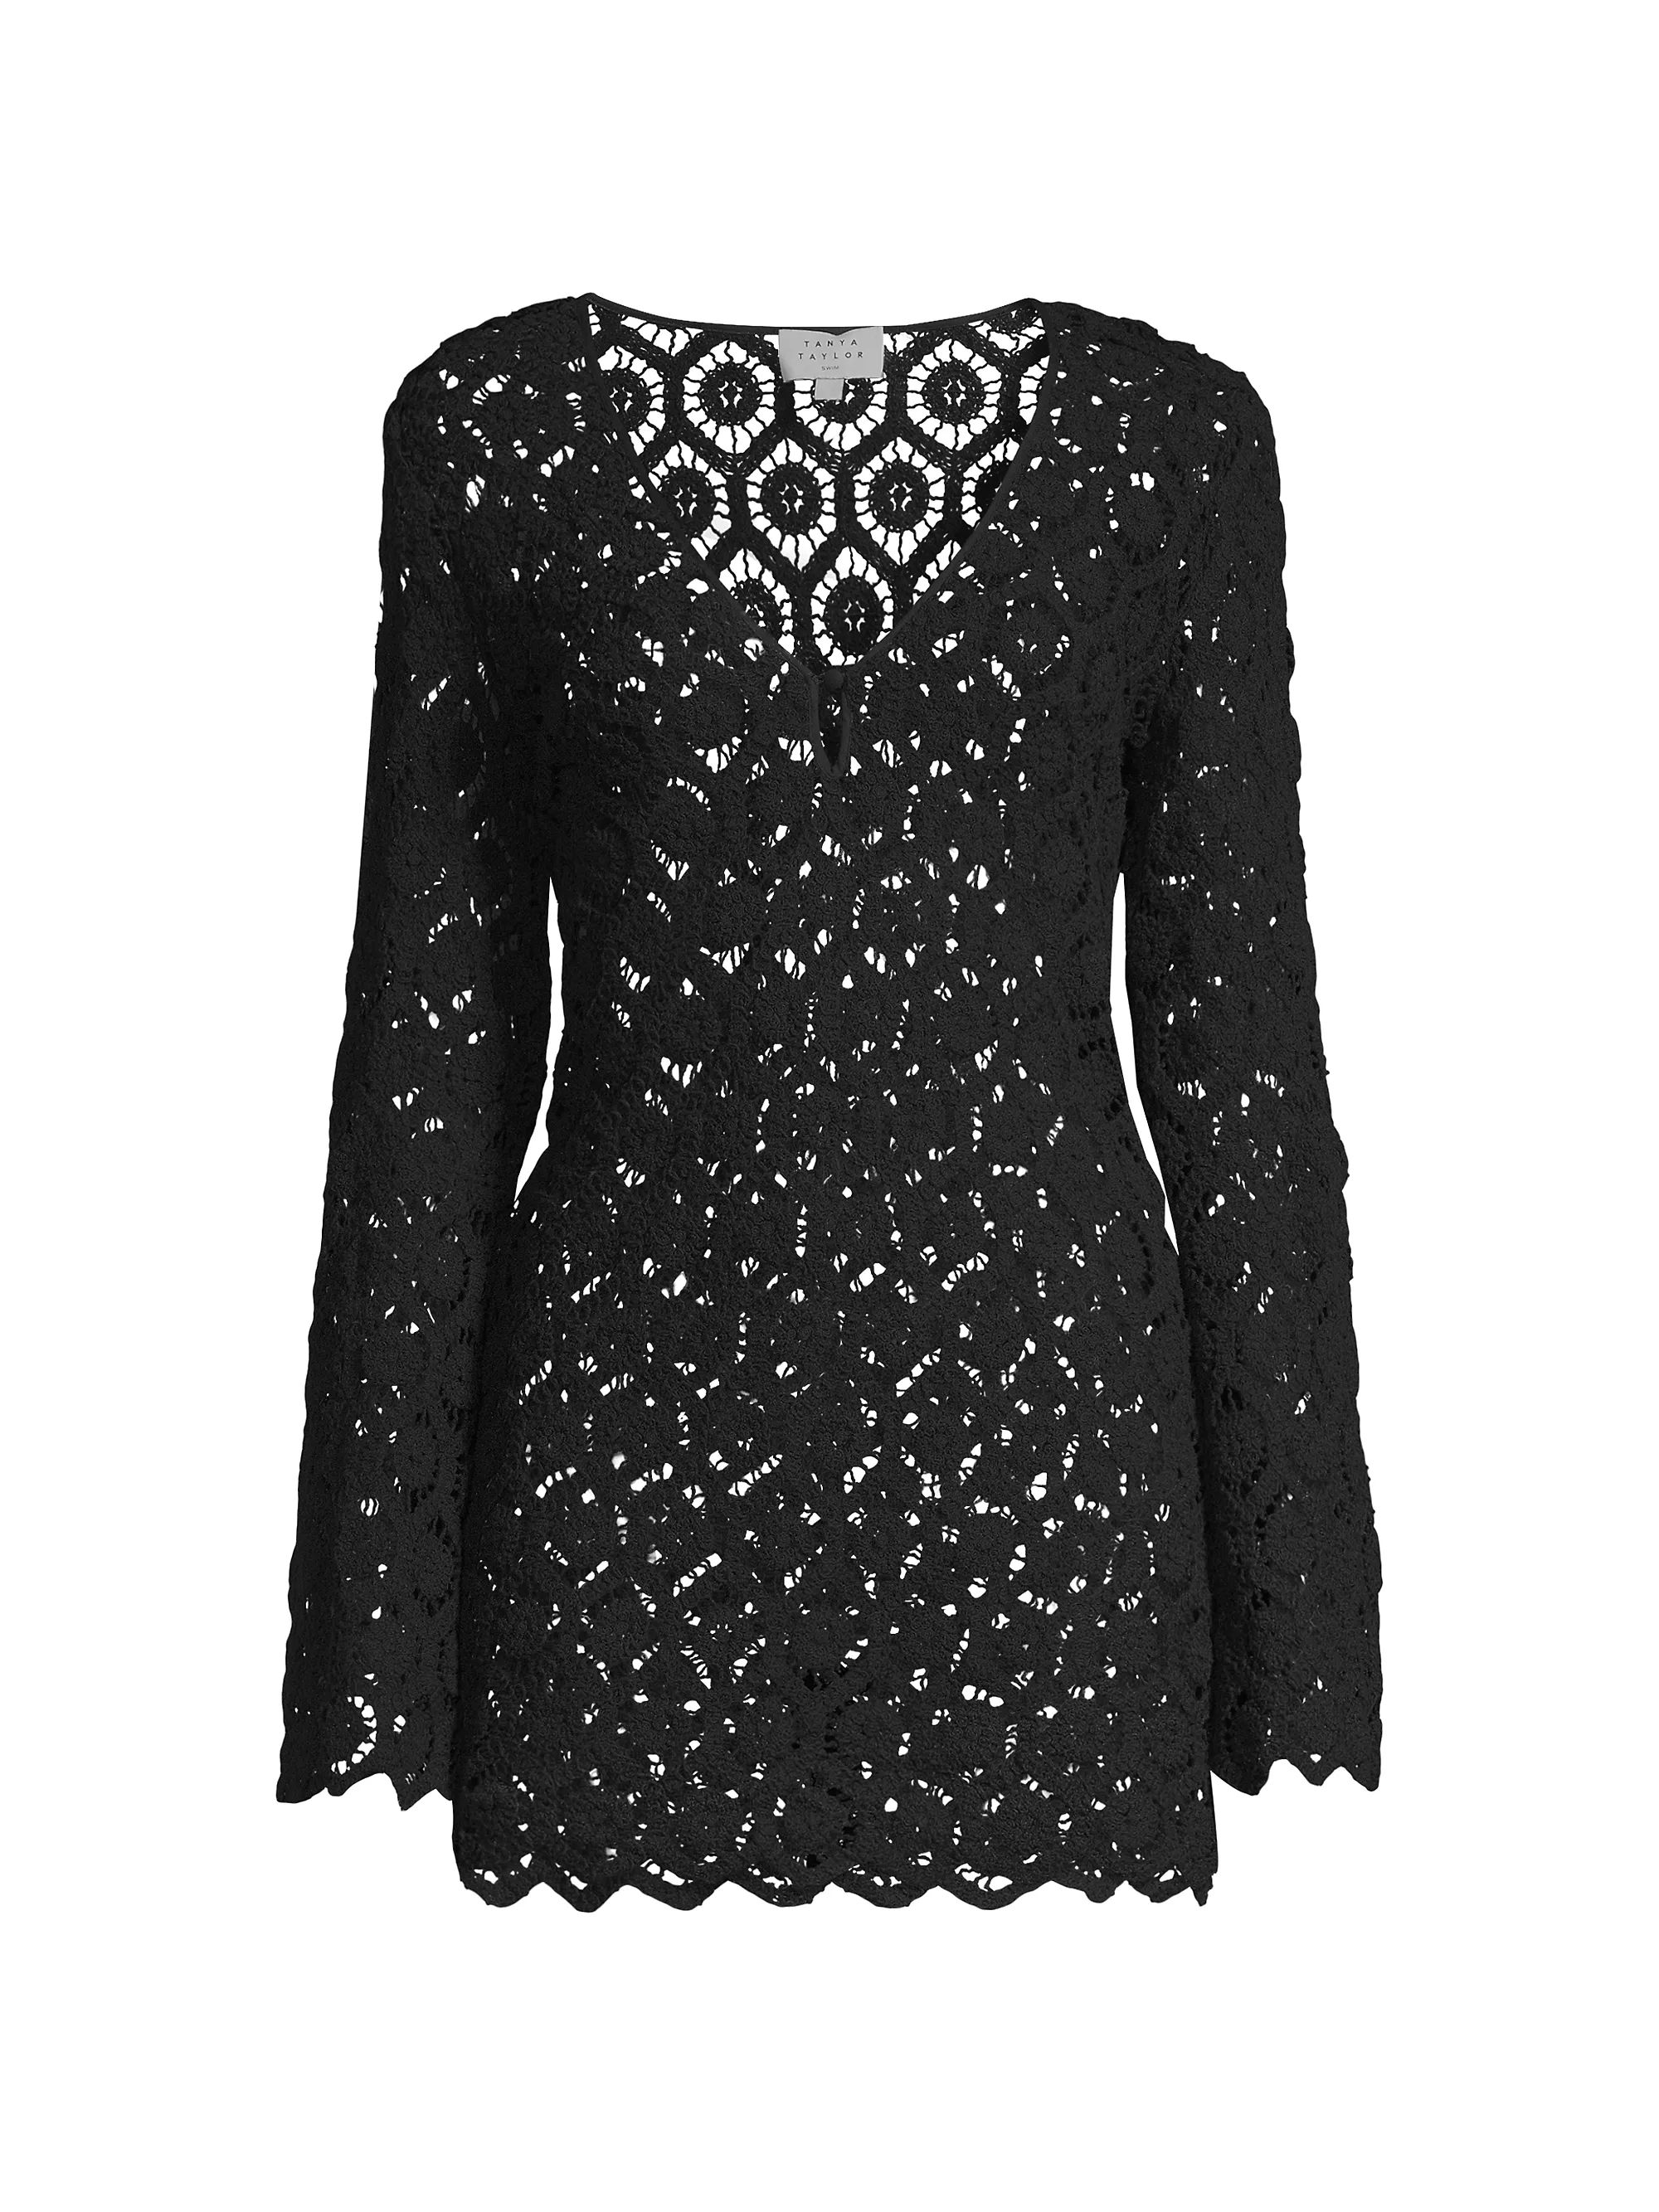 Shop Tanya Taylor Miley Cotton Lace Cover-Up Minidress | Saks Fifth Avenue | Saks Fifth Avenue